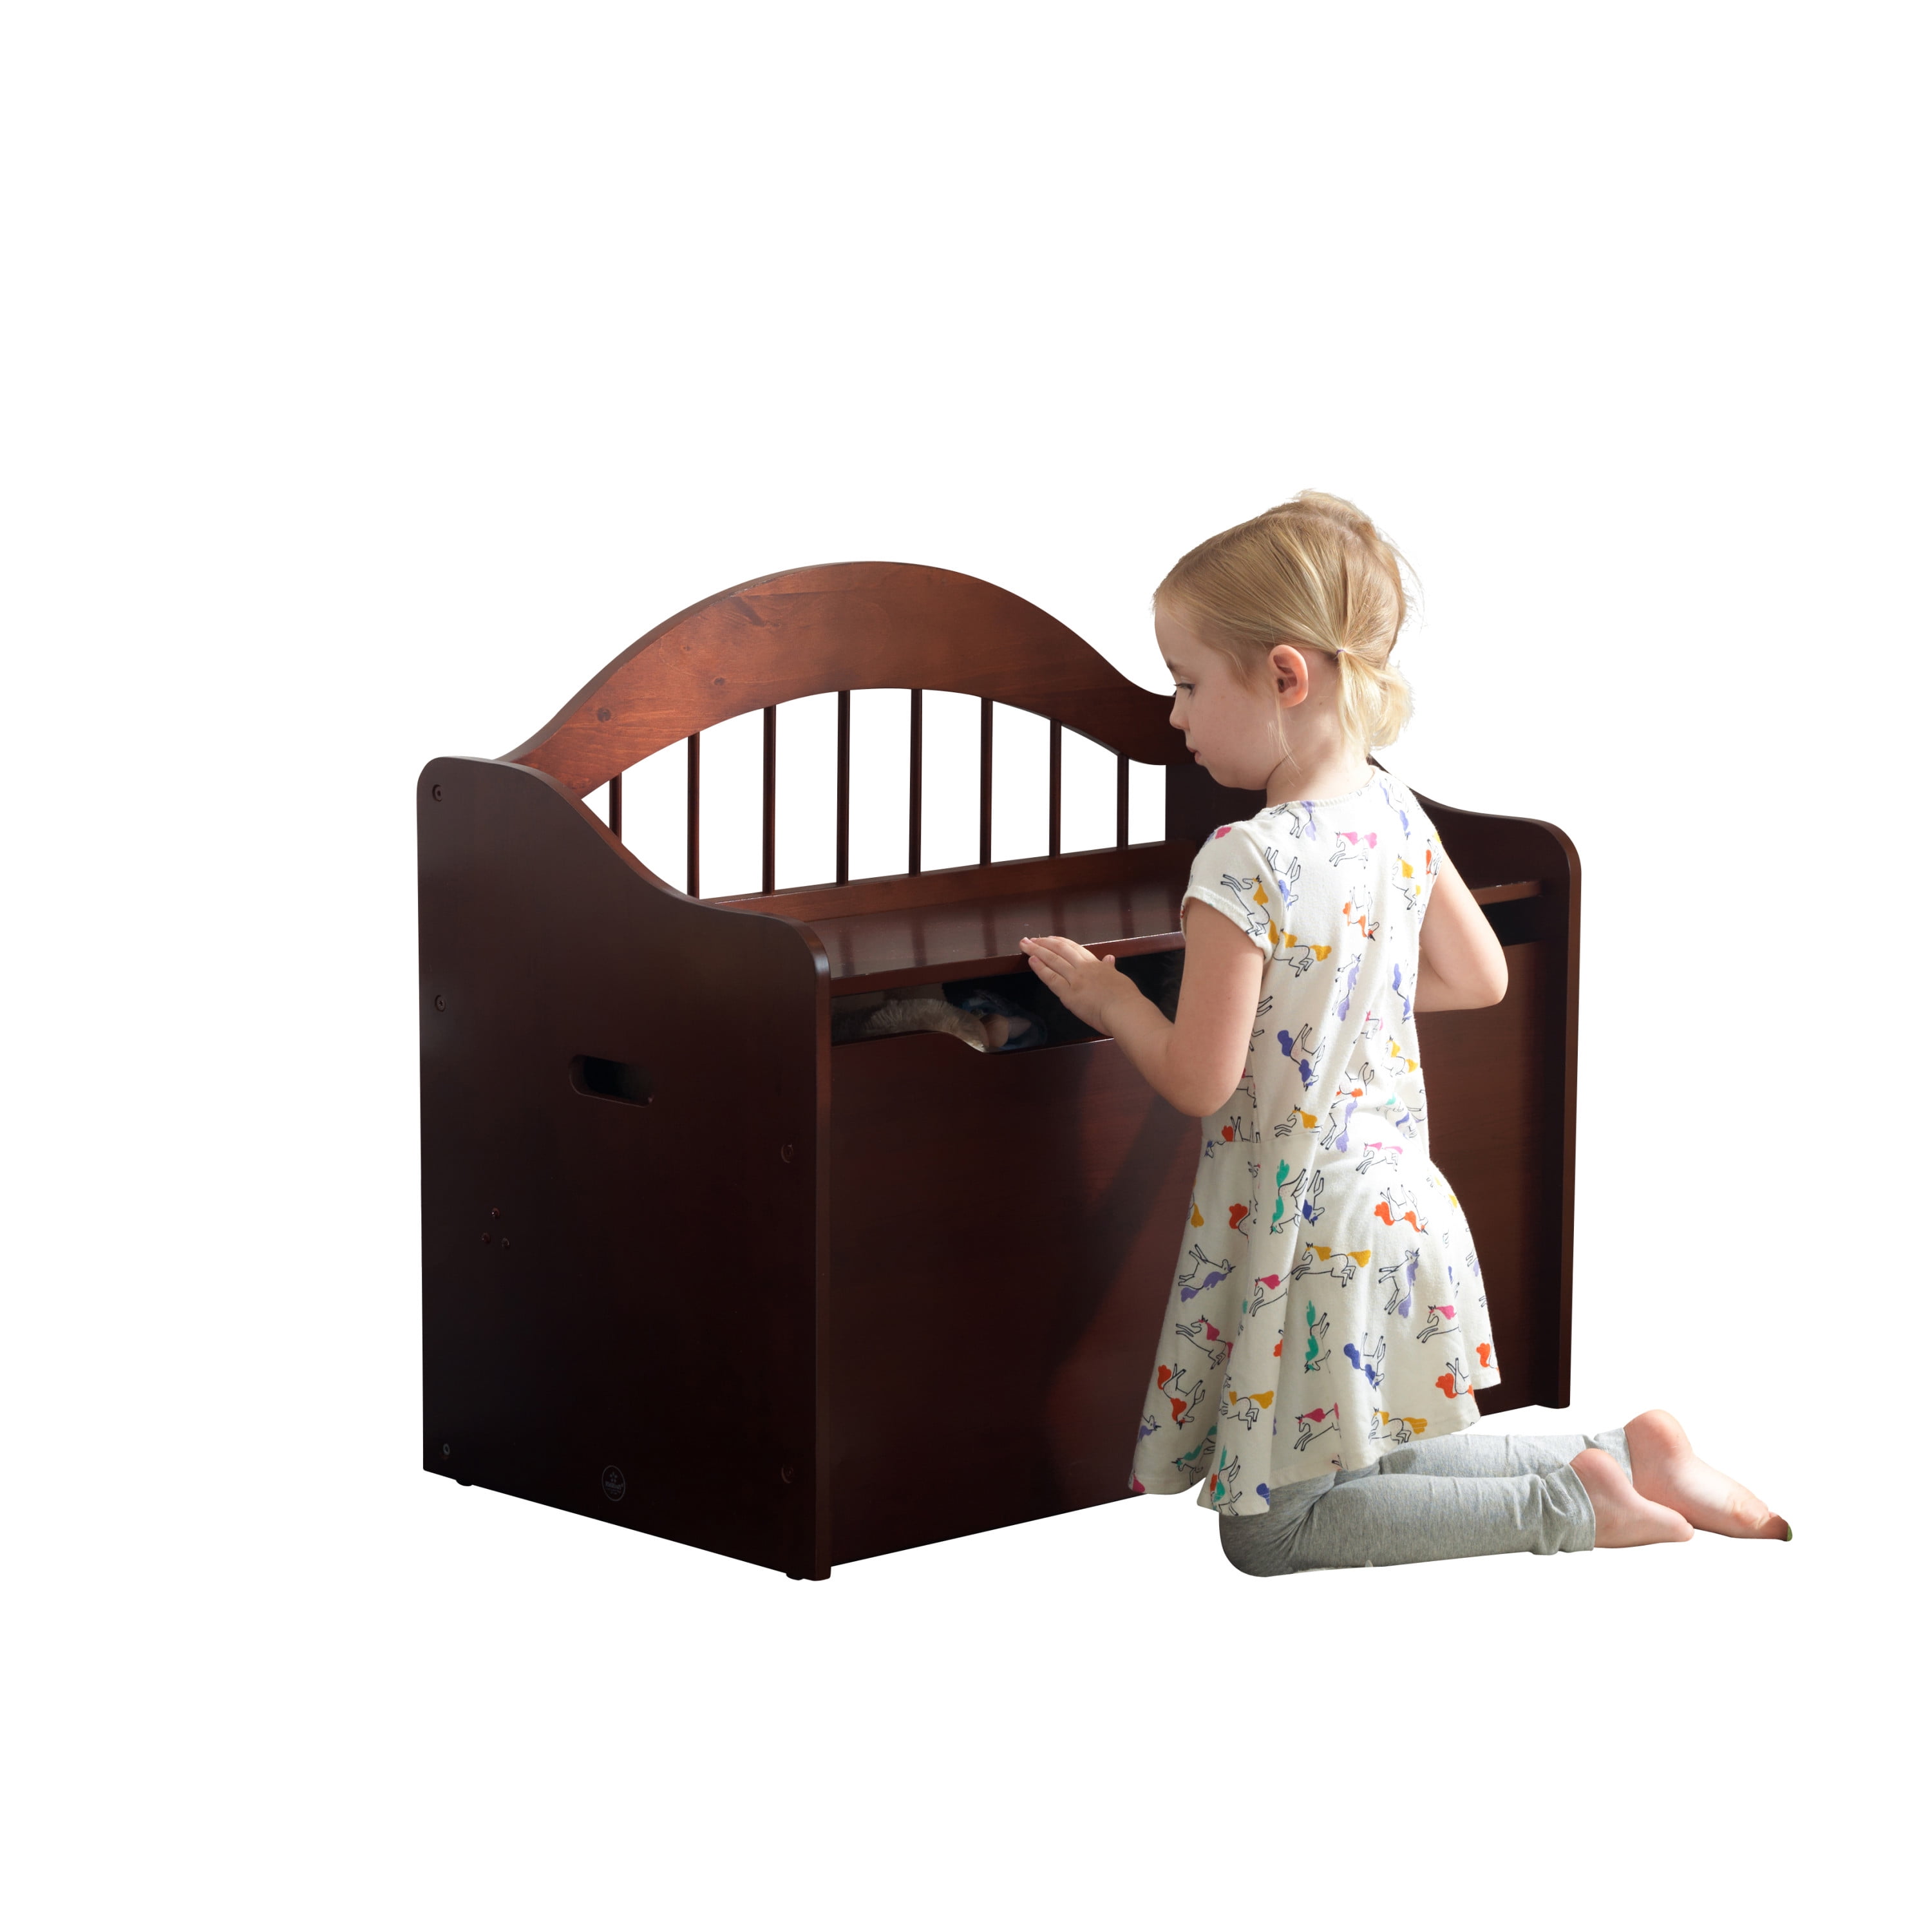 KidKraft Limited Edition Wooden Toy Box and Bench with Handles and